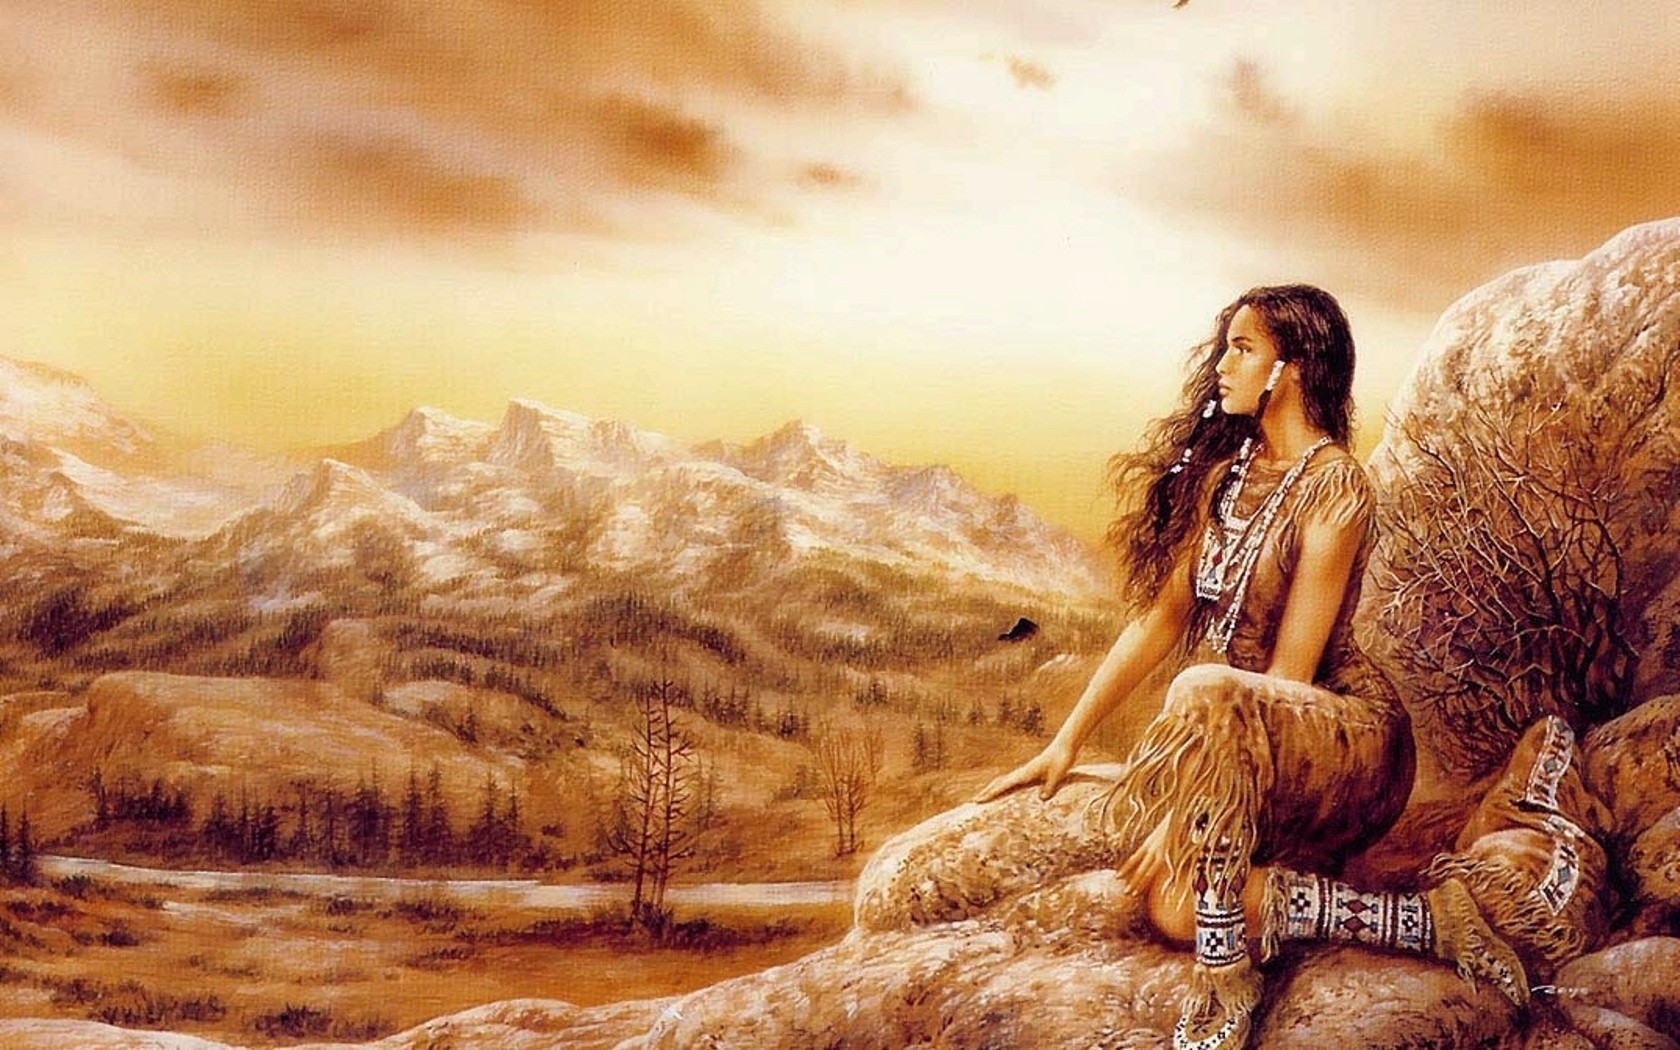 General 1680x1050 Luis Royo fantasy girl landscape Native Americans fantasy art looking into the distance long hair nature mountains